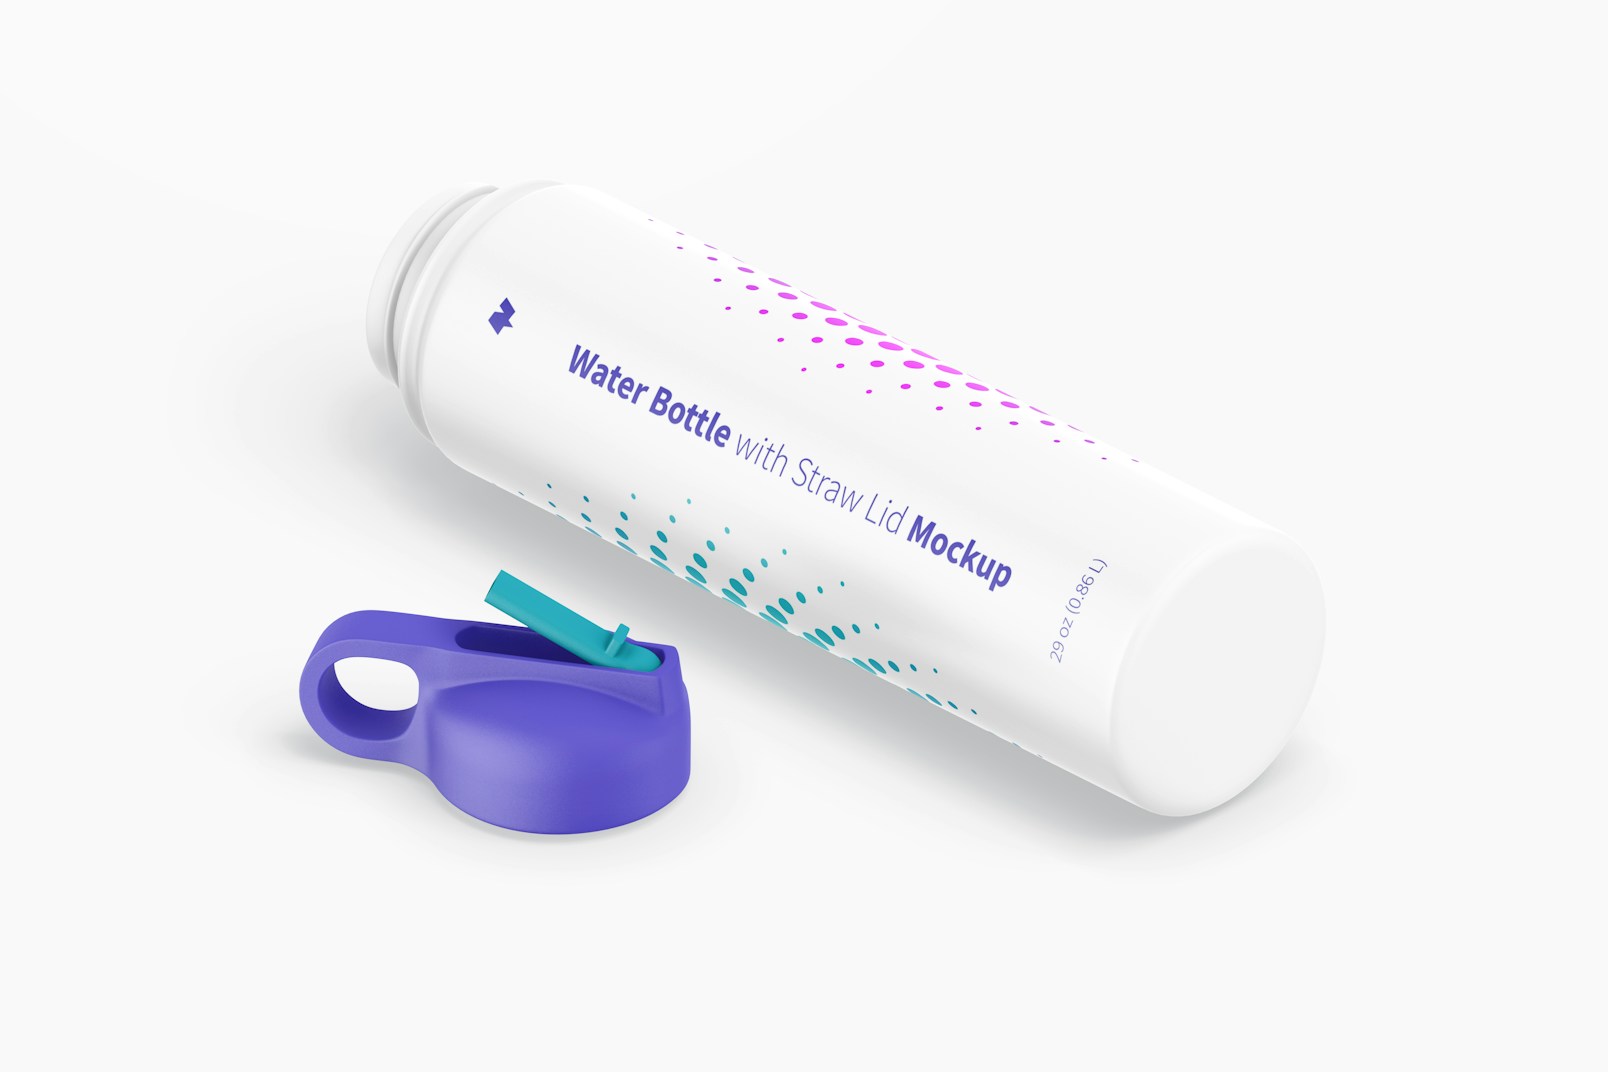 Water Bottle with Straw Lid Mockup, Isometric View Opened